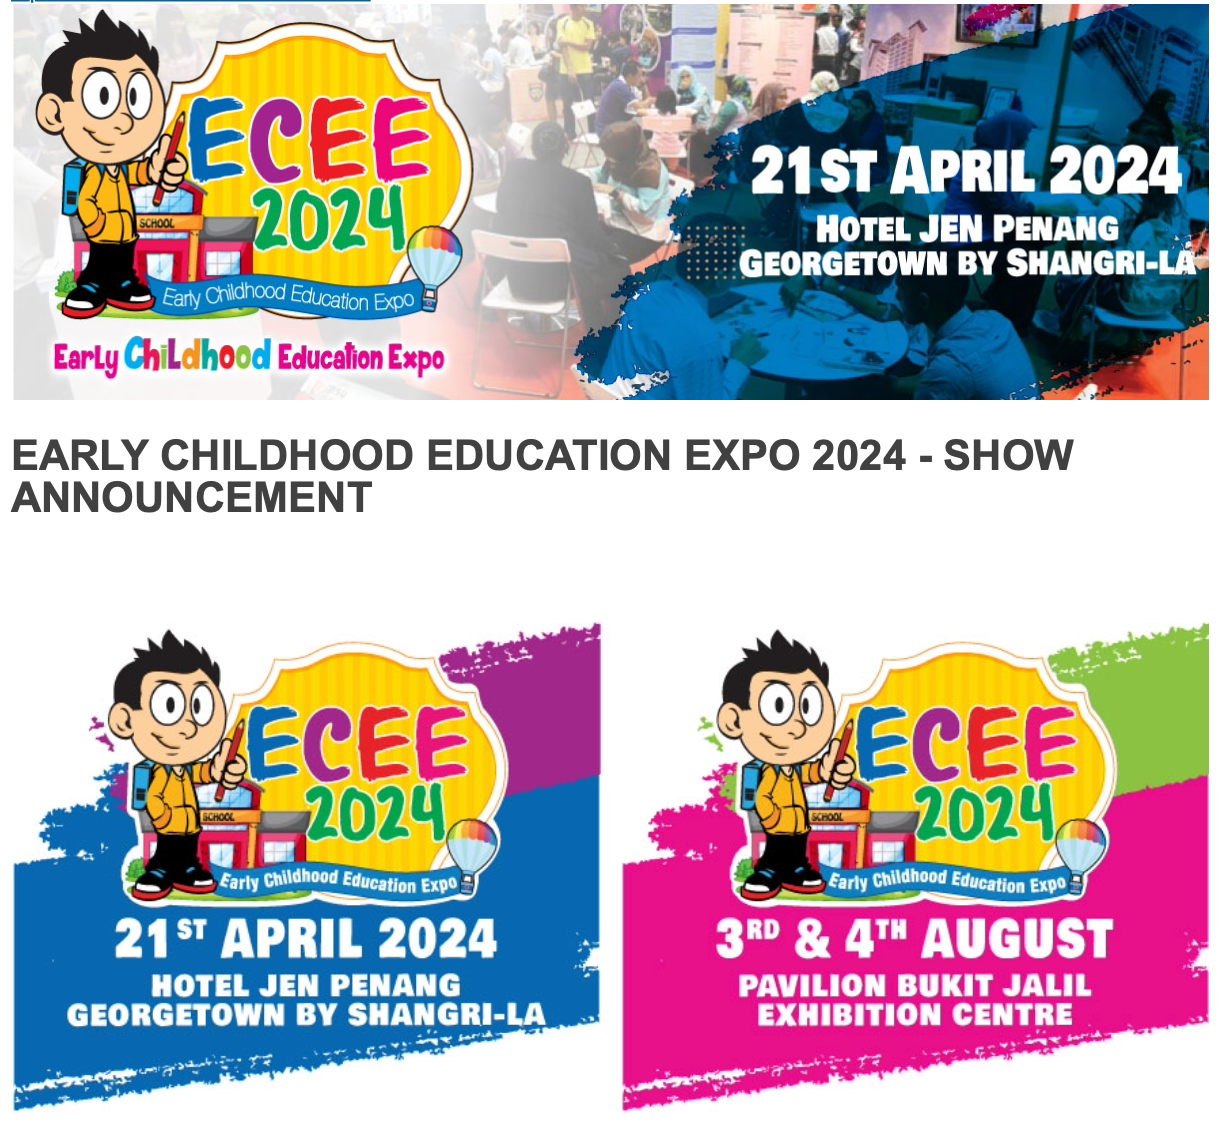 EARLY CHILDHOOD EDUCATION EXPO 2024 - SHOW ANNOUNCEMENT